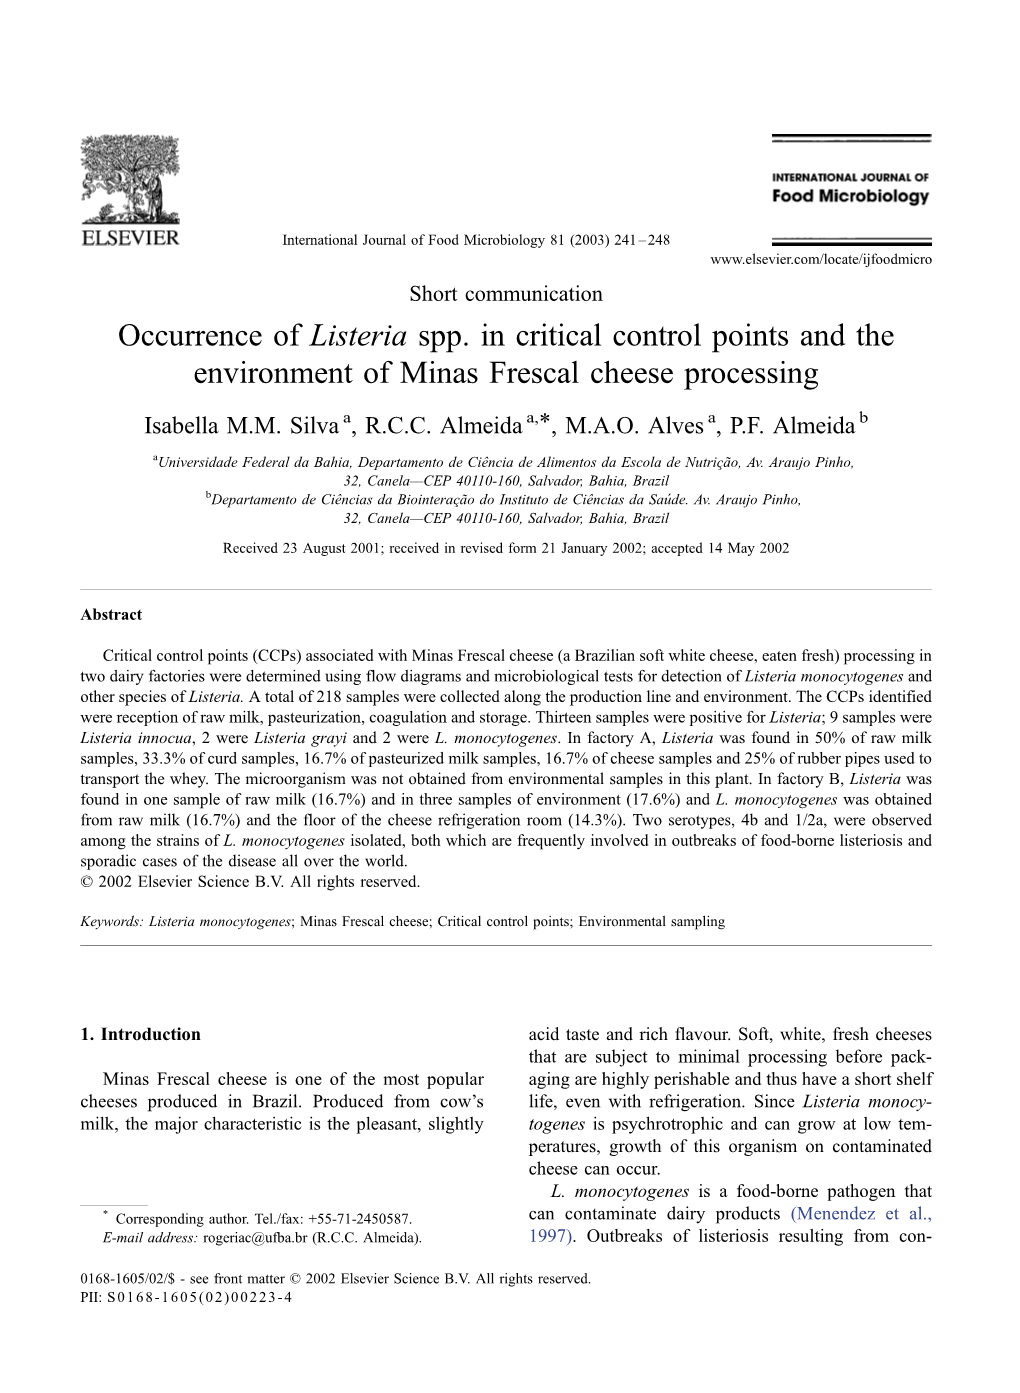 Occurrence of Listeria Spp. in Critical Control Points and the Environment of Minas Frescal Cheese Processing